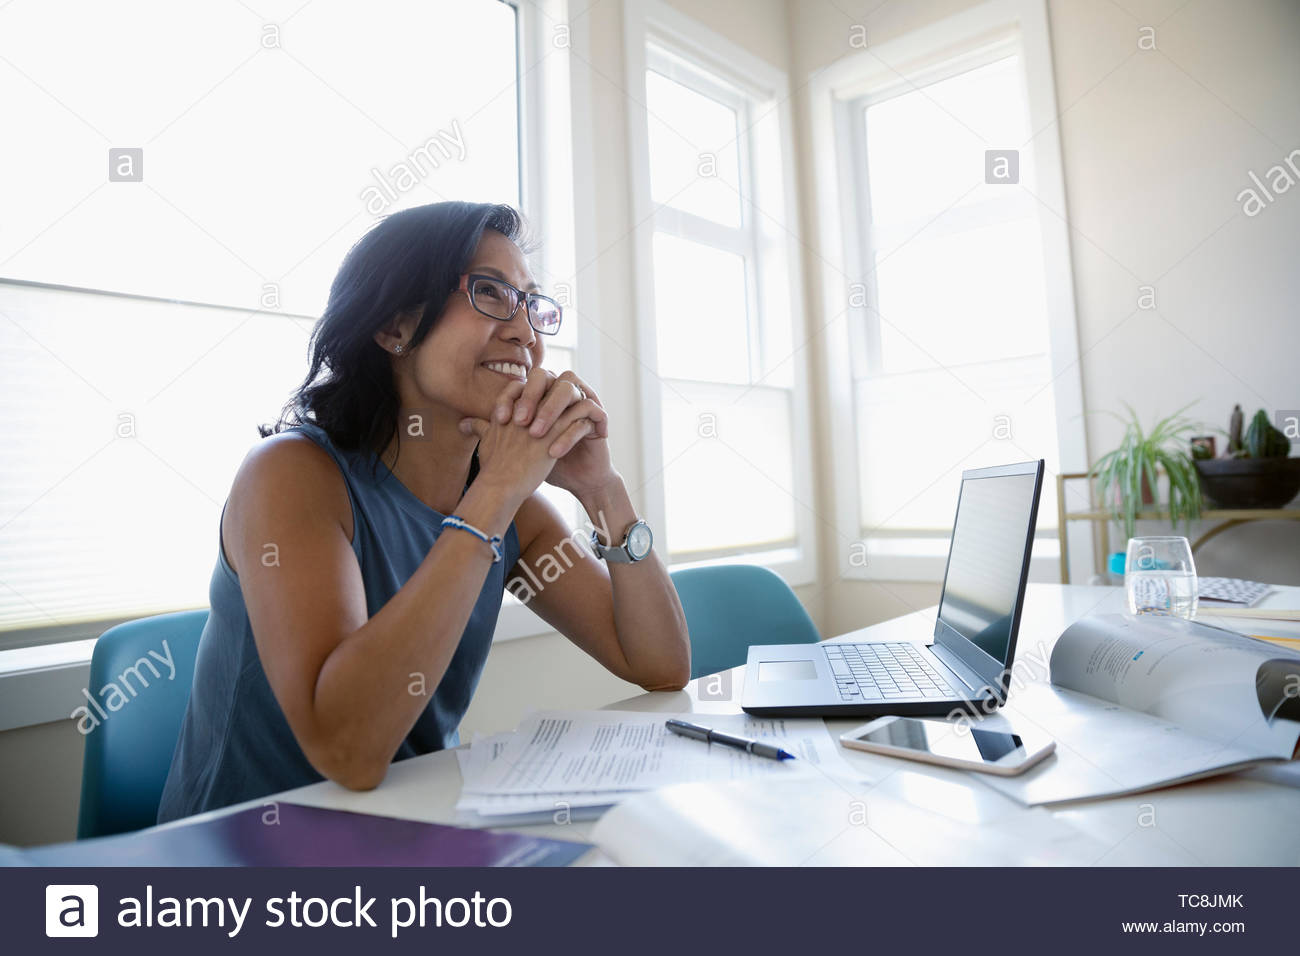 Smiling mature student studying at laptop Stock Photo